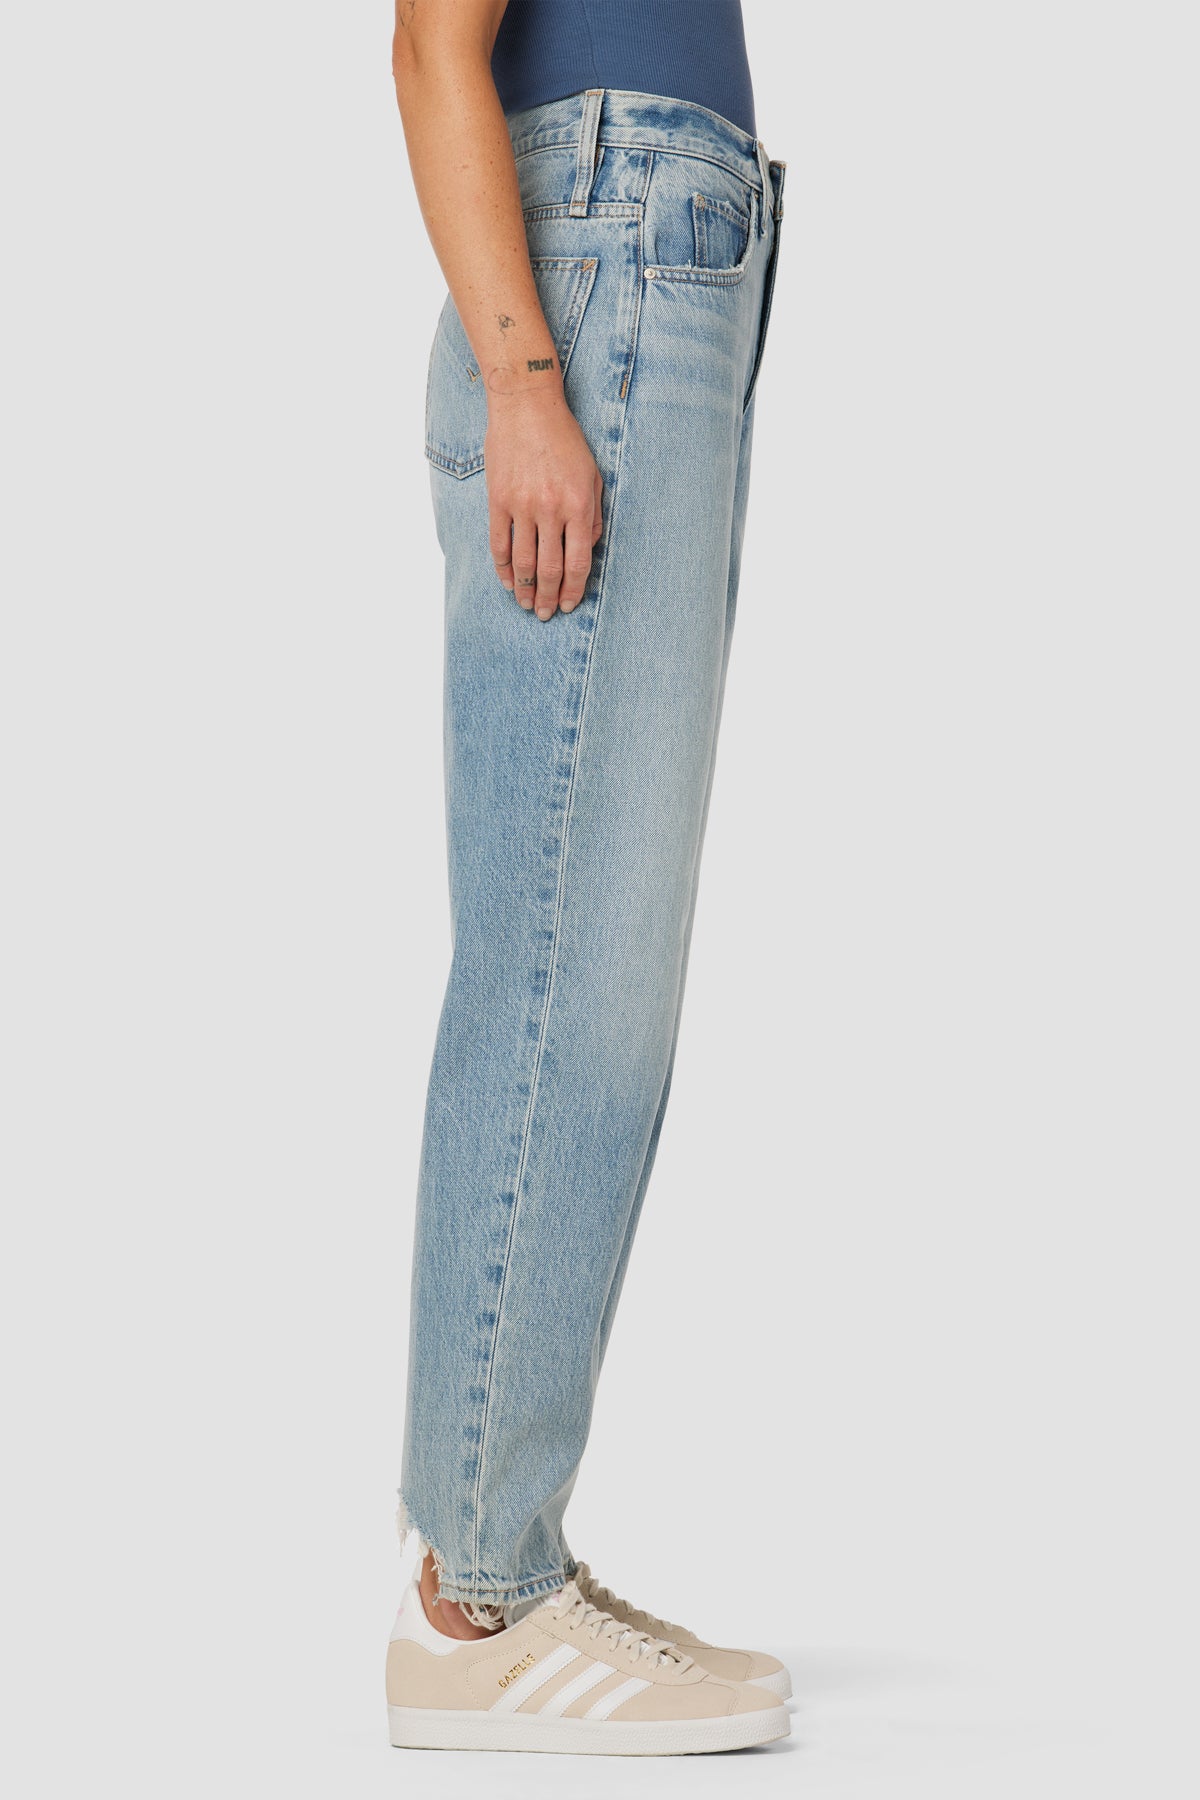 Womens Tall Jeans - Womens Fashion Jeans - Rugged Jeans at Rs 280/piece, Leo International Jeans Exporters India China Usa in Surat